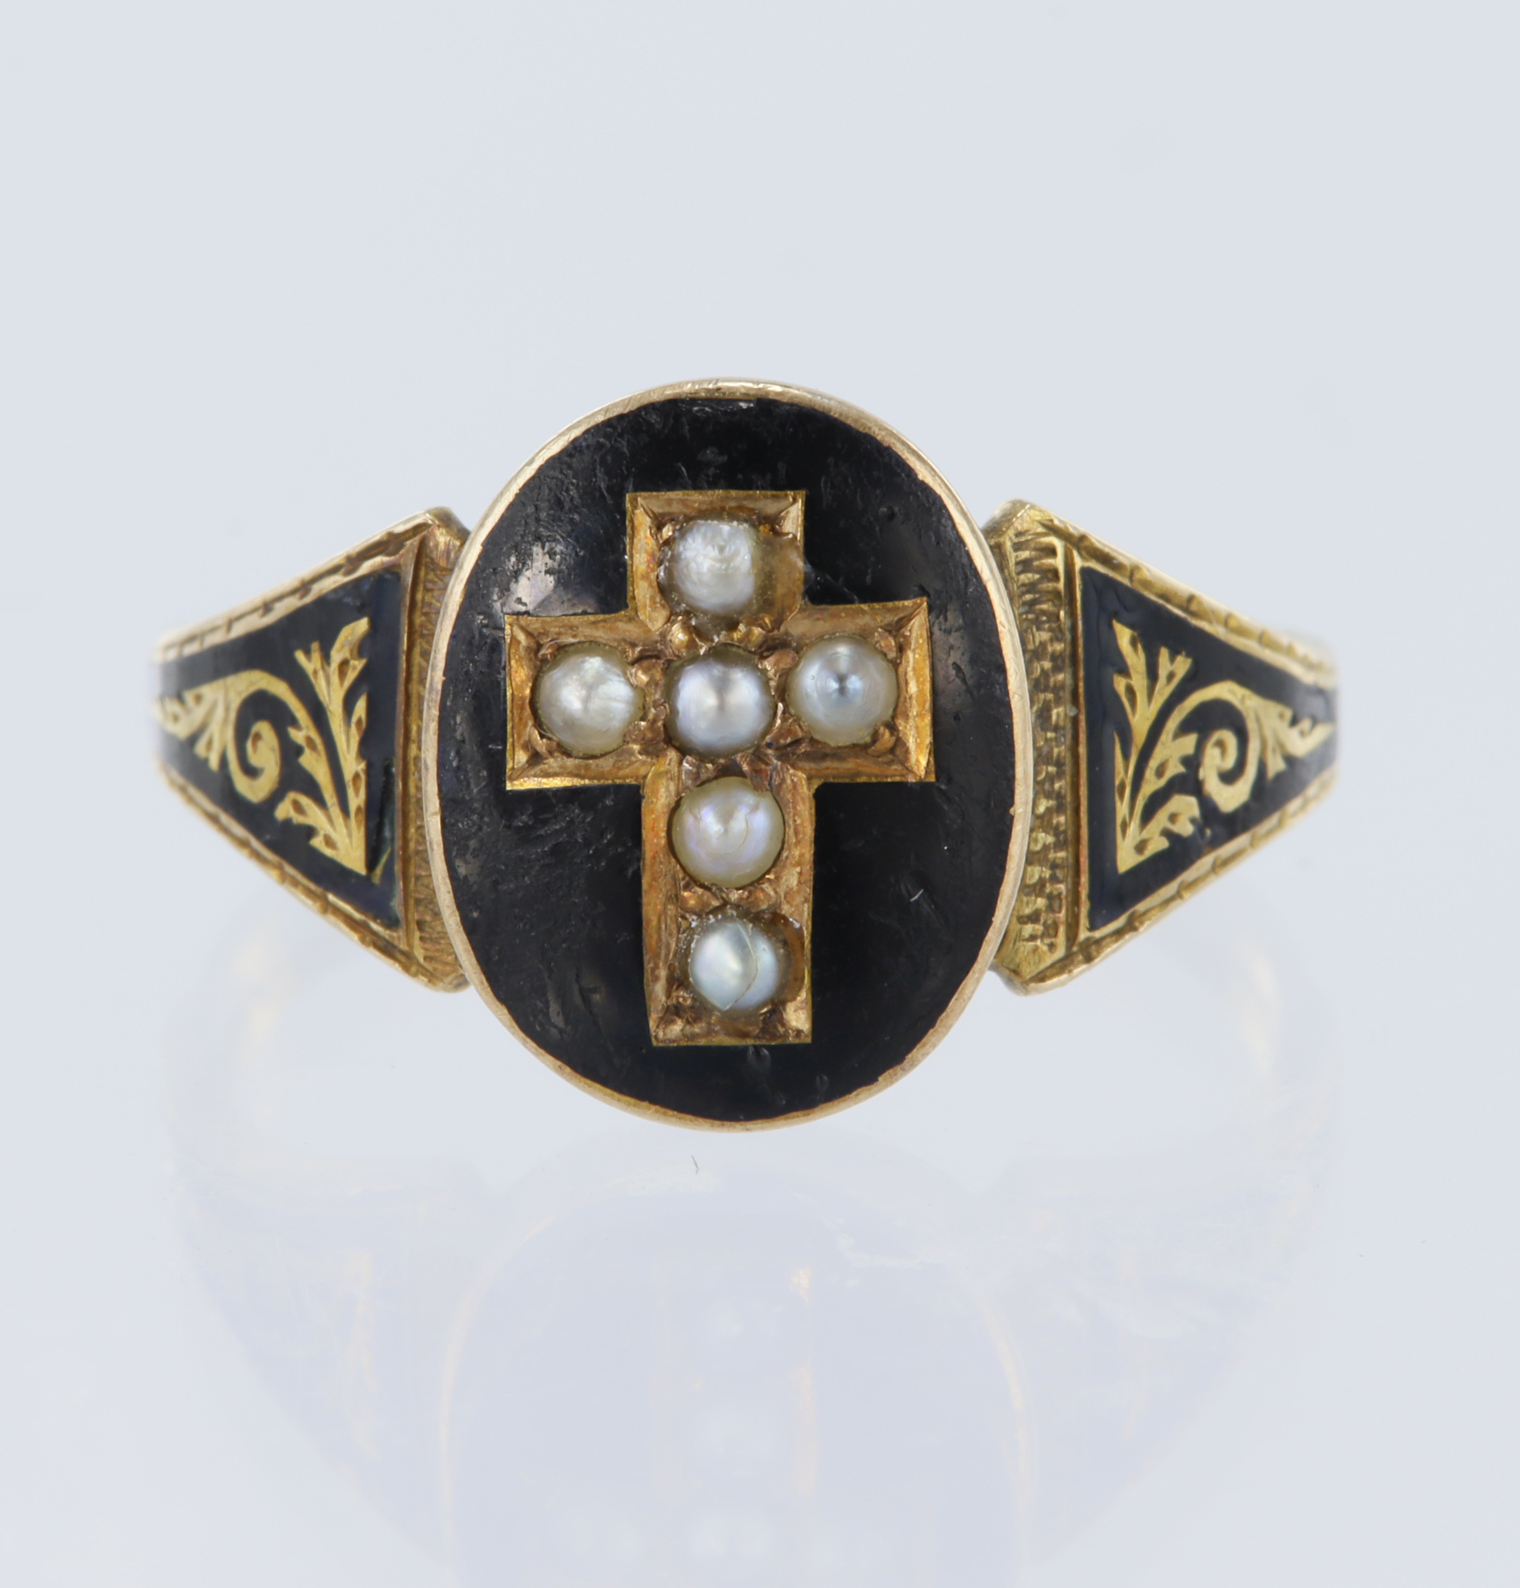 15ct Makers mark H&S, mourning ring, set with 6 seed pearls & black enamel. Oval table size